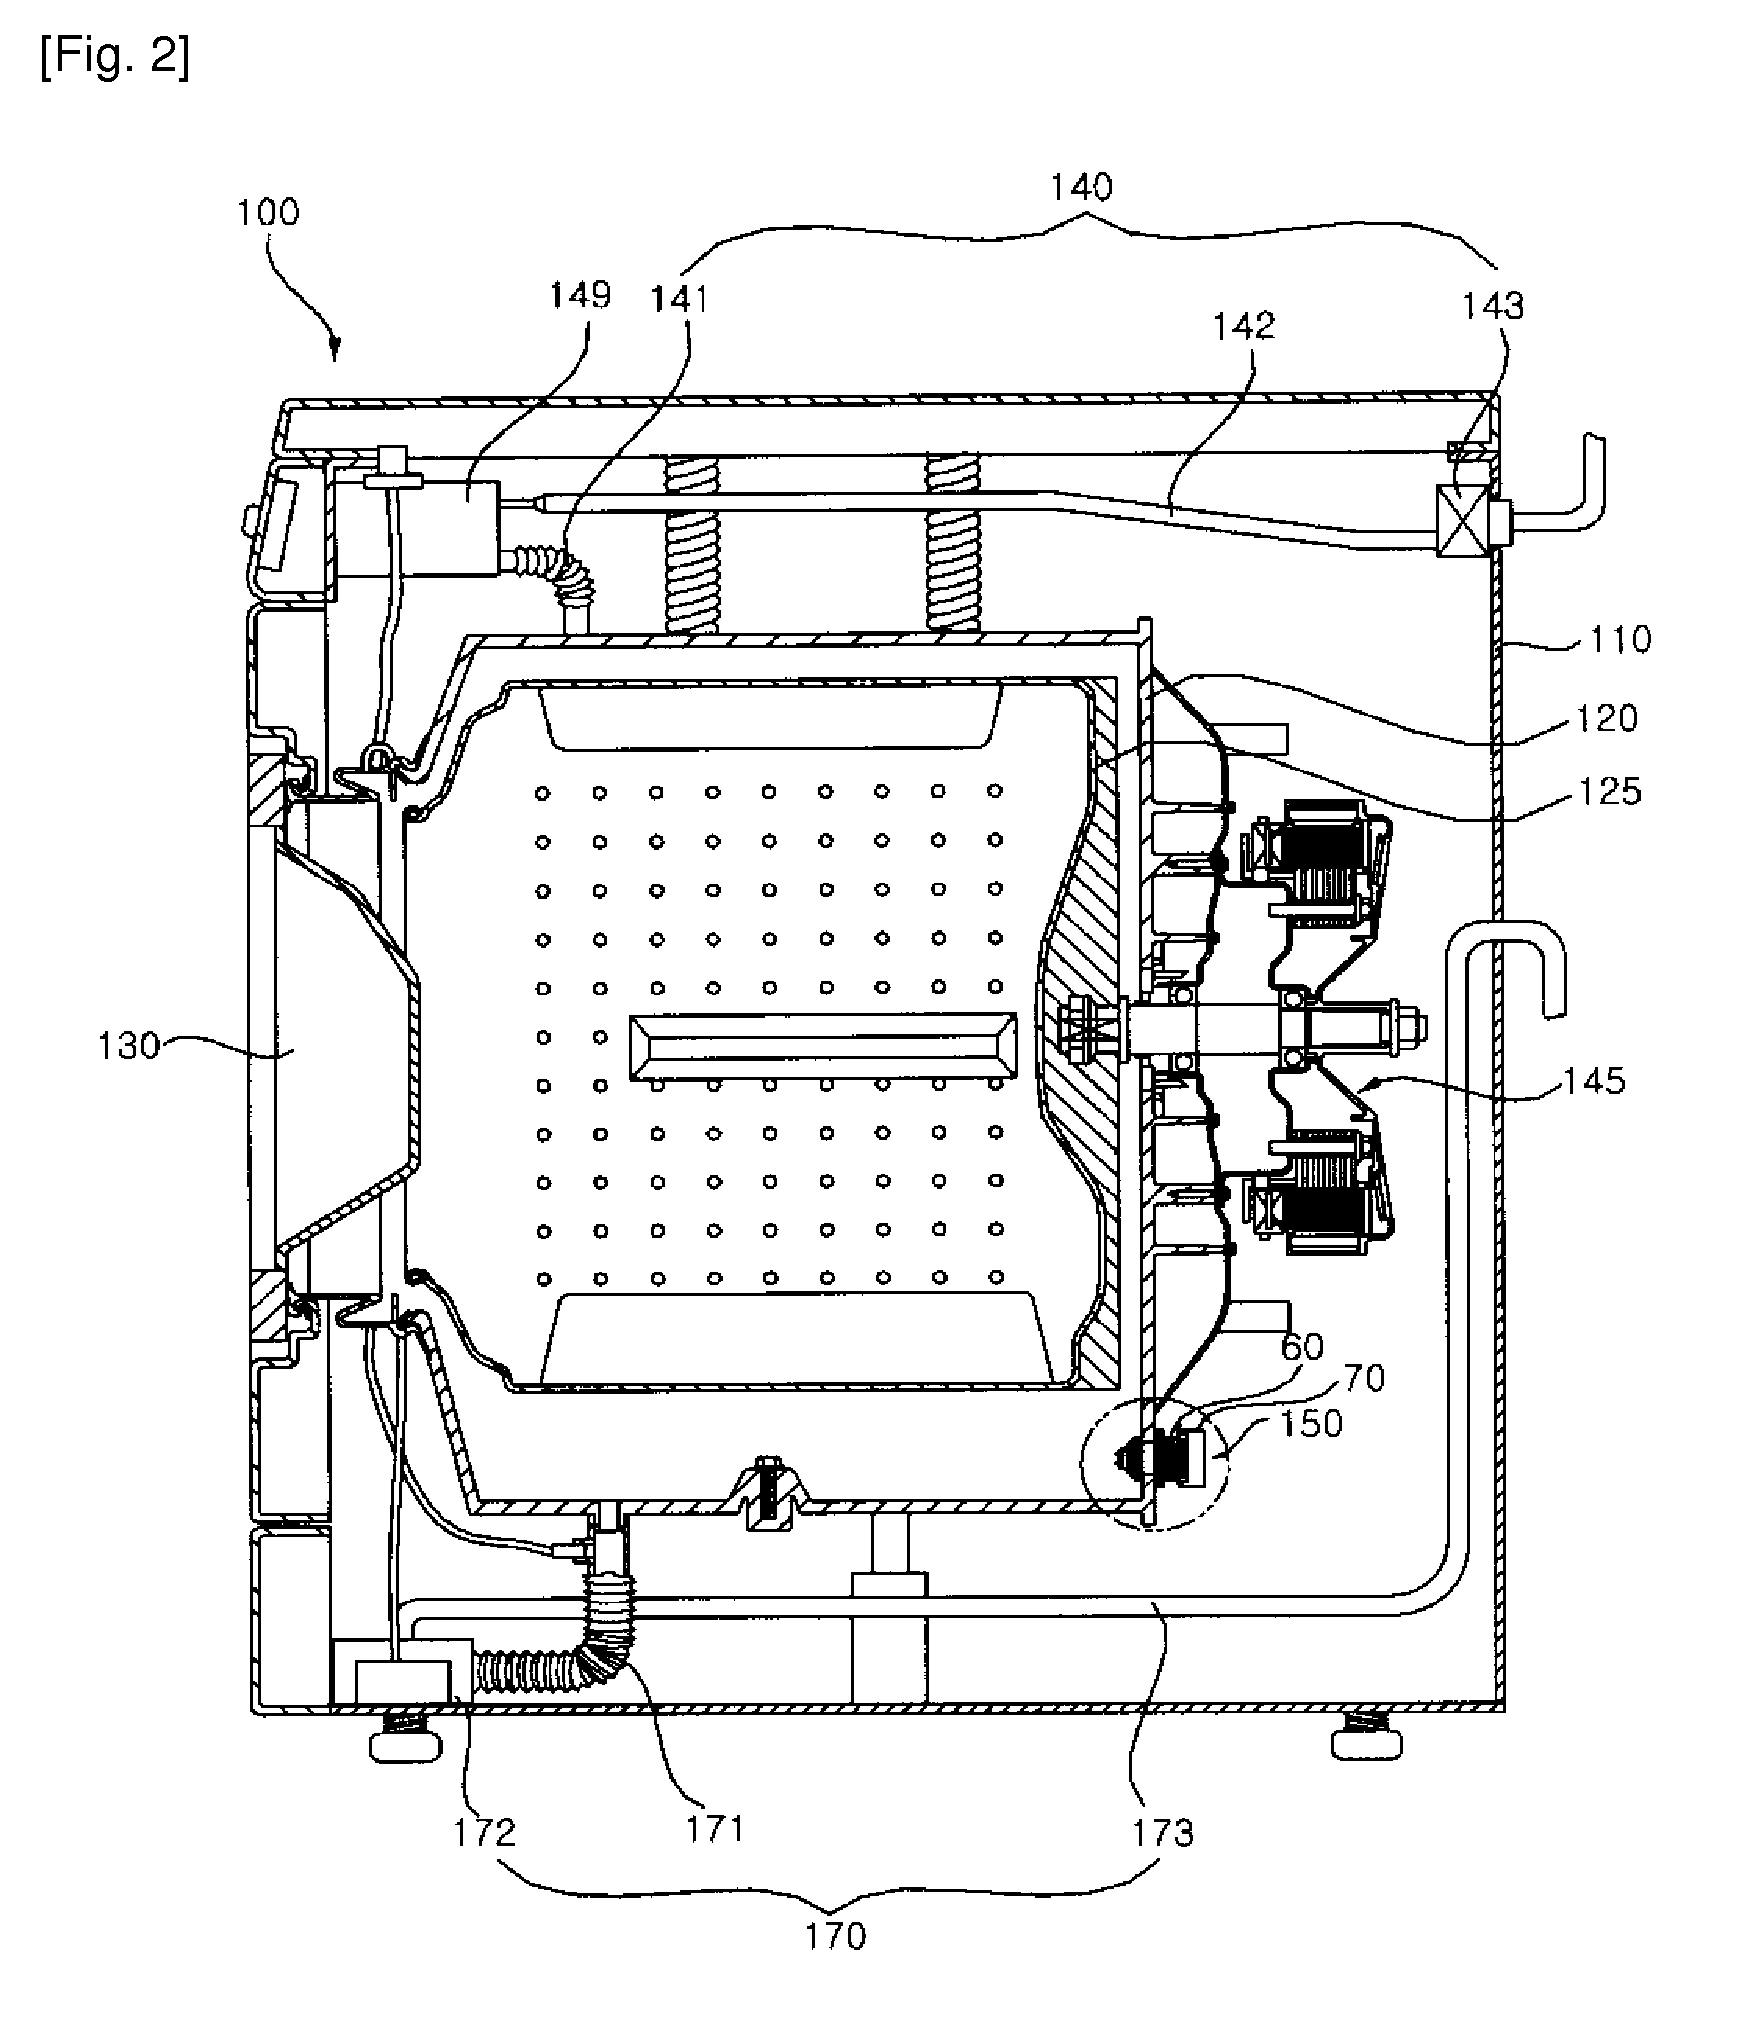 Method and apparatus for treating laundry